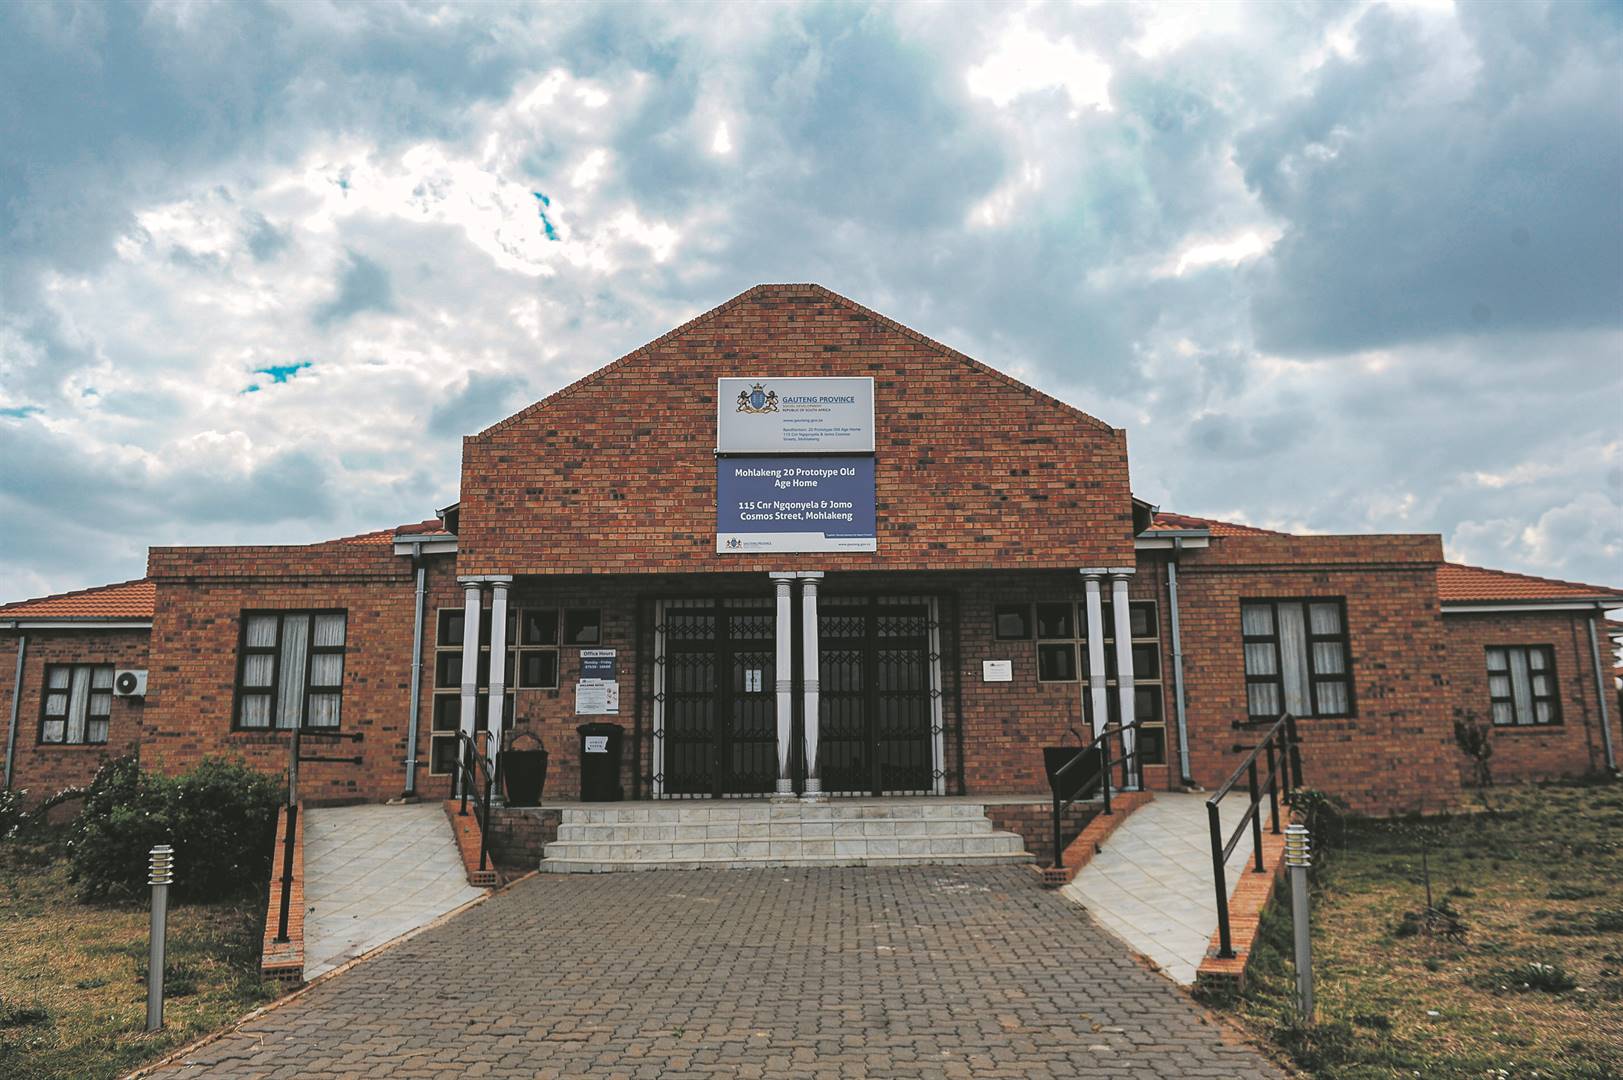 Construction of the Mohlakeng Old Age Home was completed in 2012, but not a single beneficiary has set foot inside the building, which can take in more than 70 elderly people at a time. Photo: Rosetta Msimango